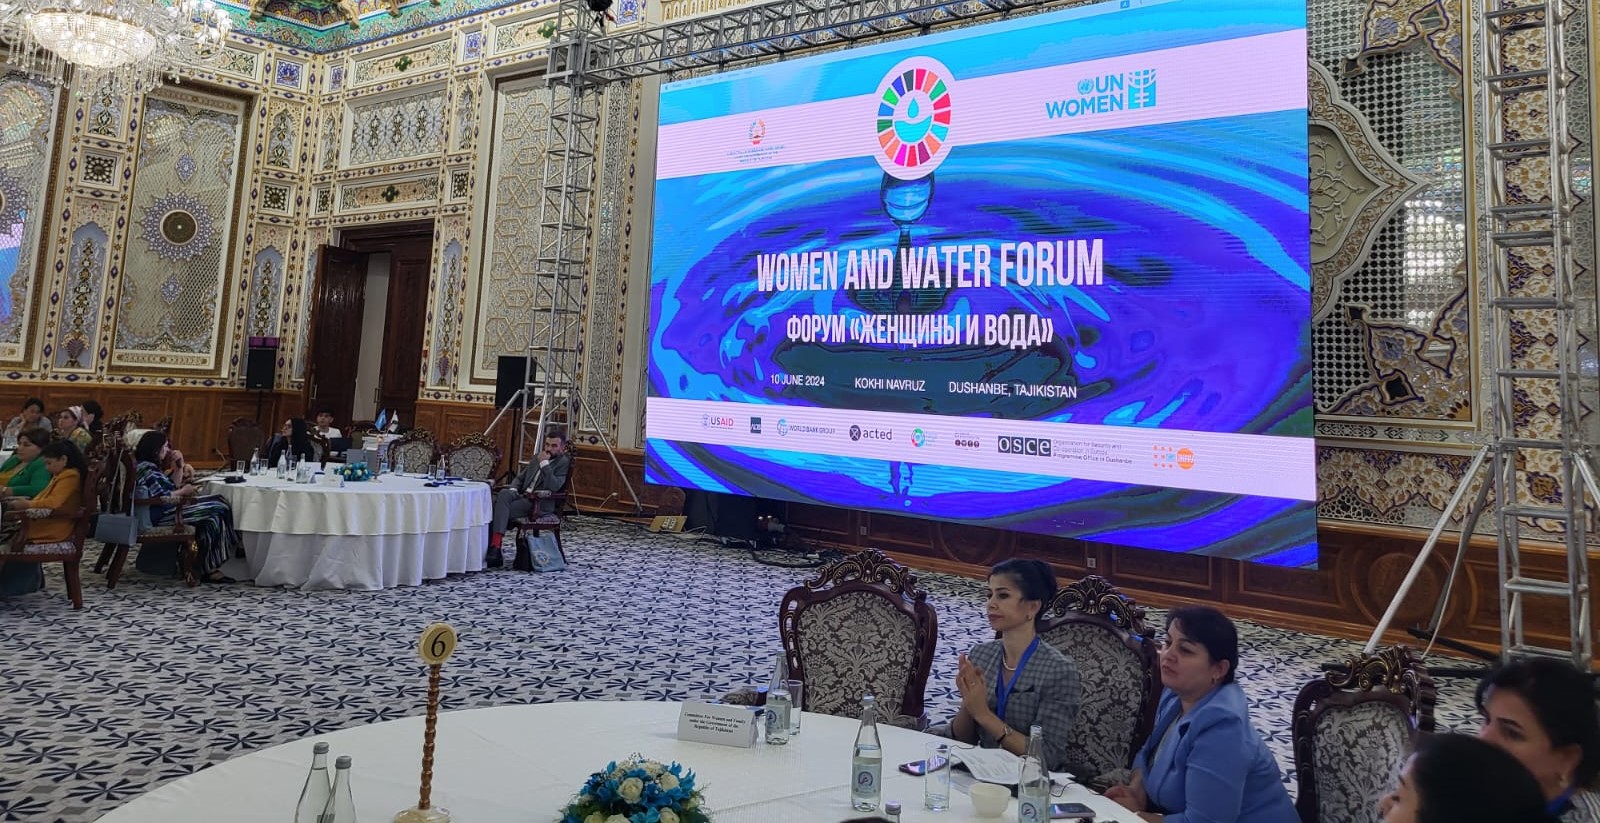 WOMEN AND WATER FORUM. Women in Water Diplomacy for Peaceful, Just and Inclusive Societies